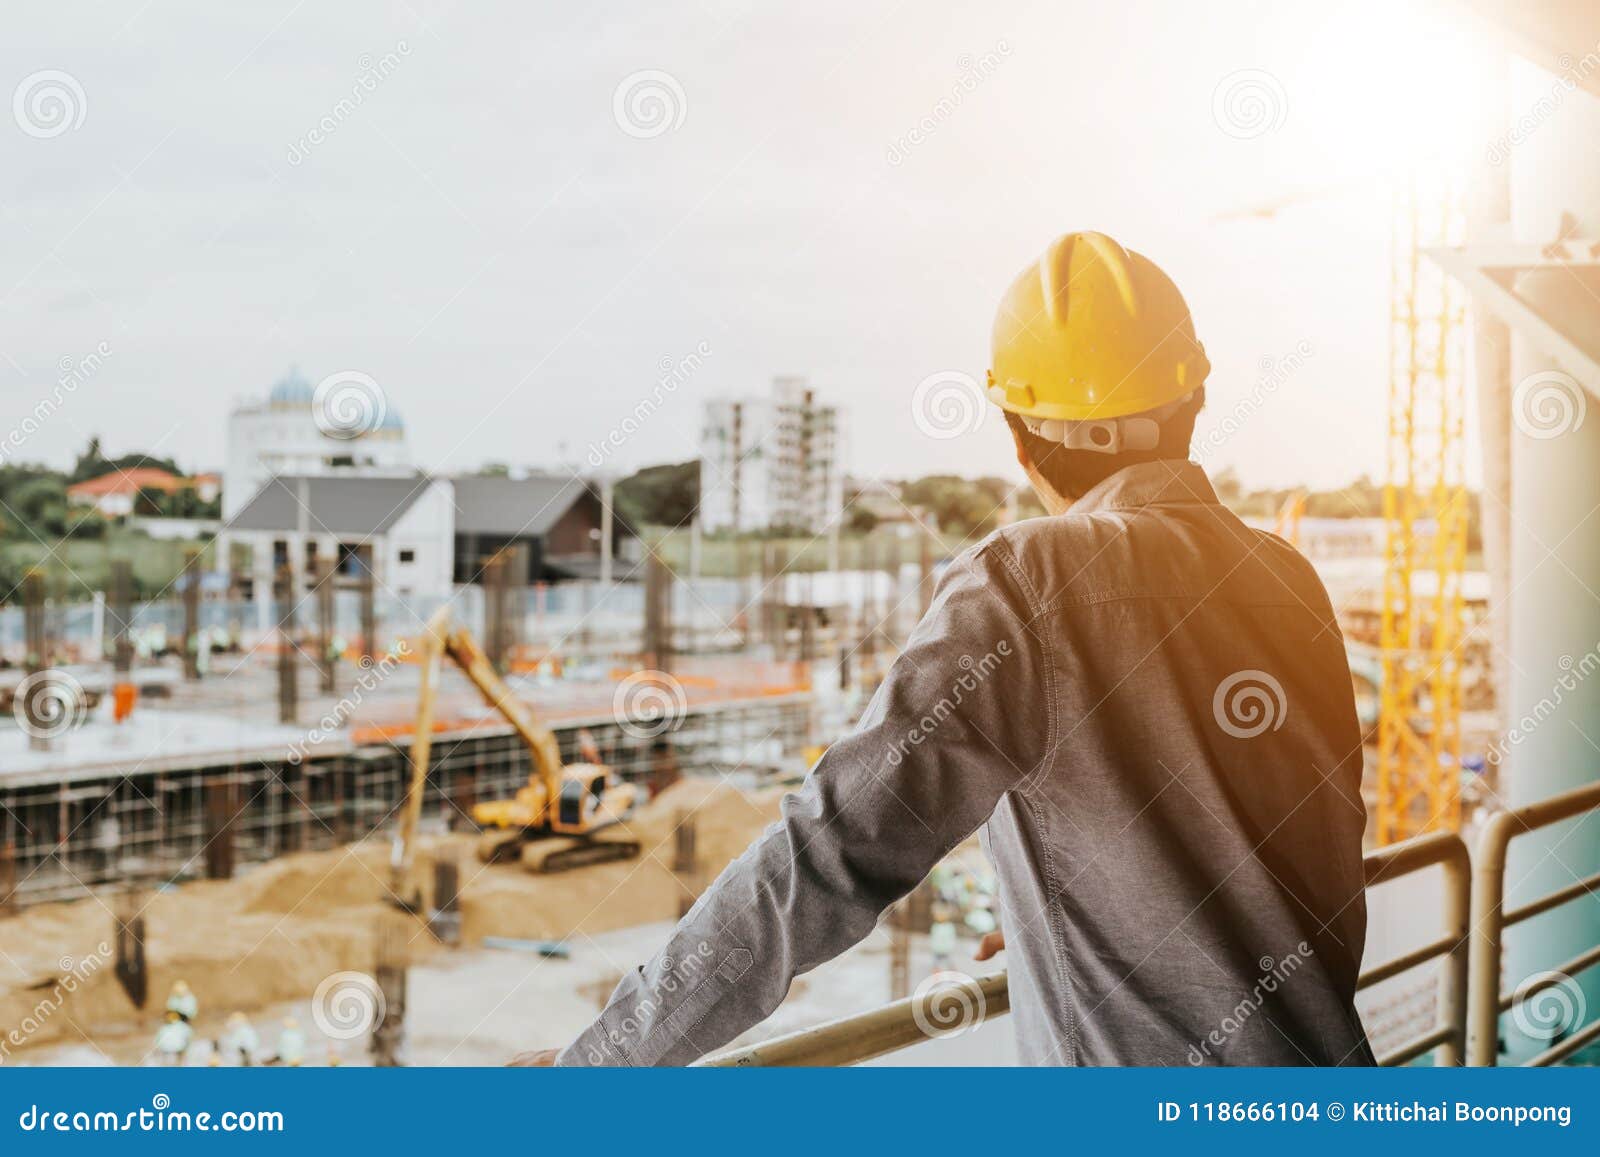 worker in a construction site